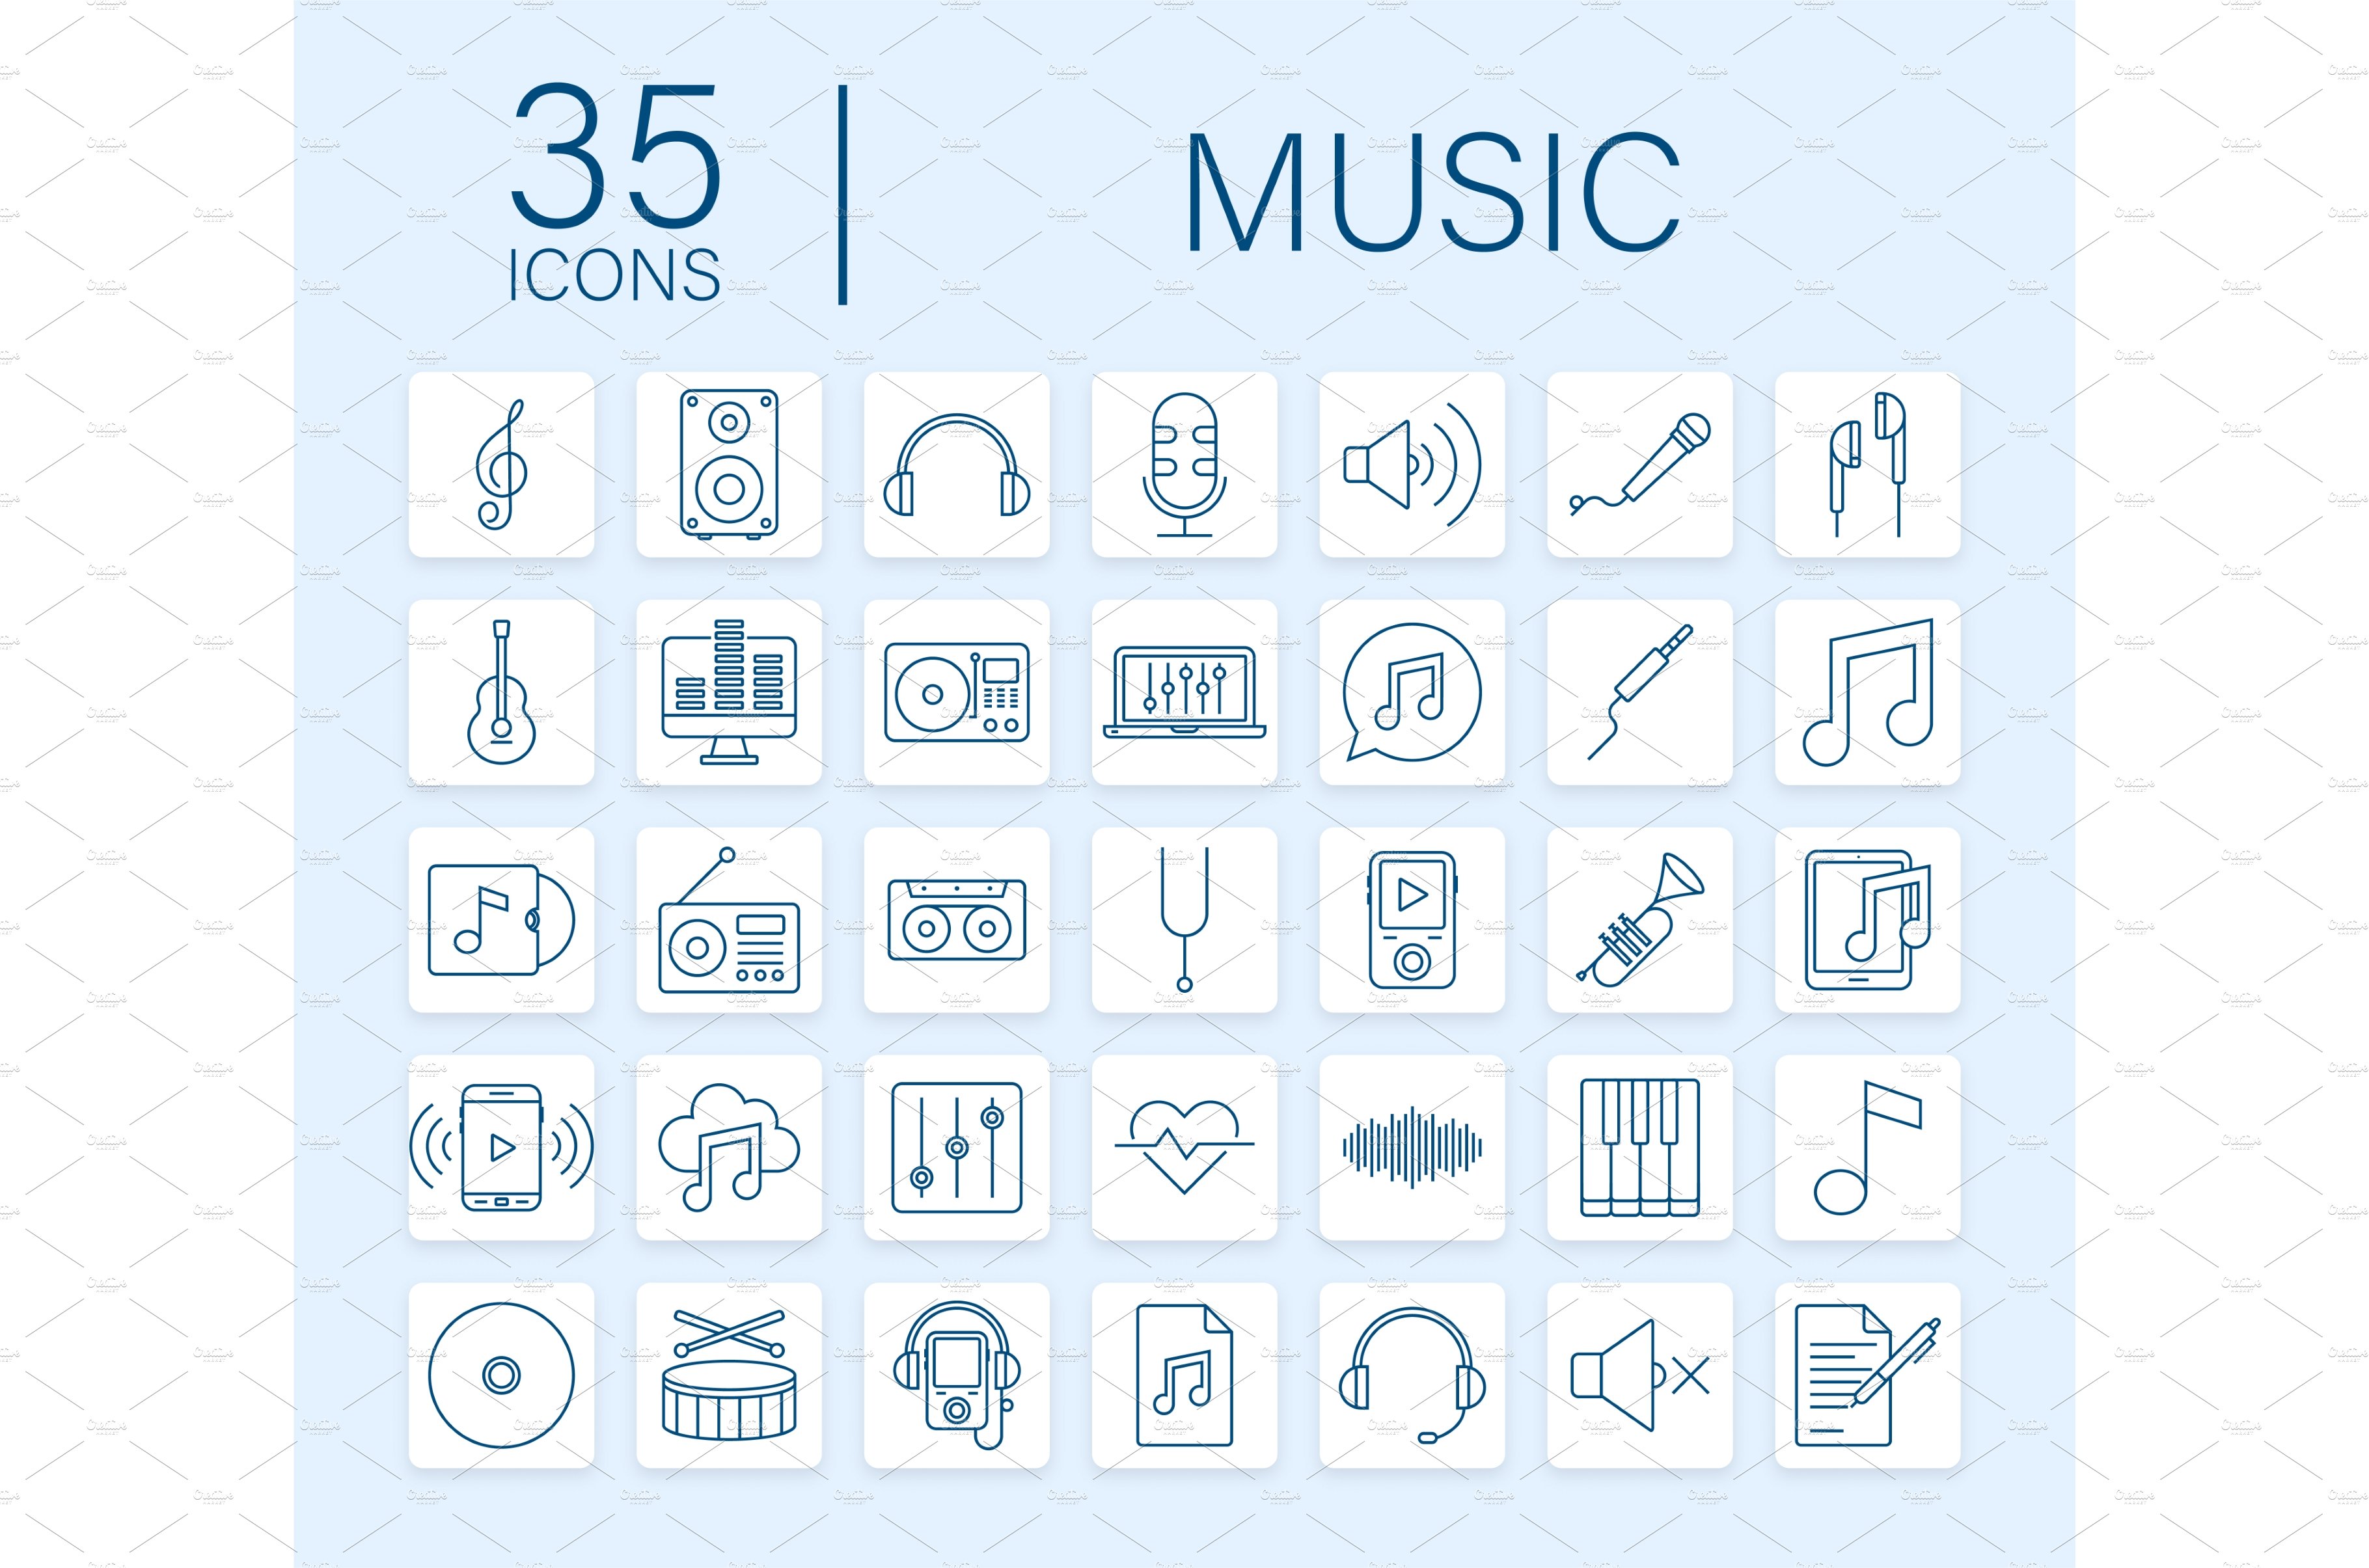 Music icon in flat style. Music cover image.